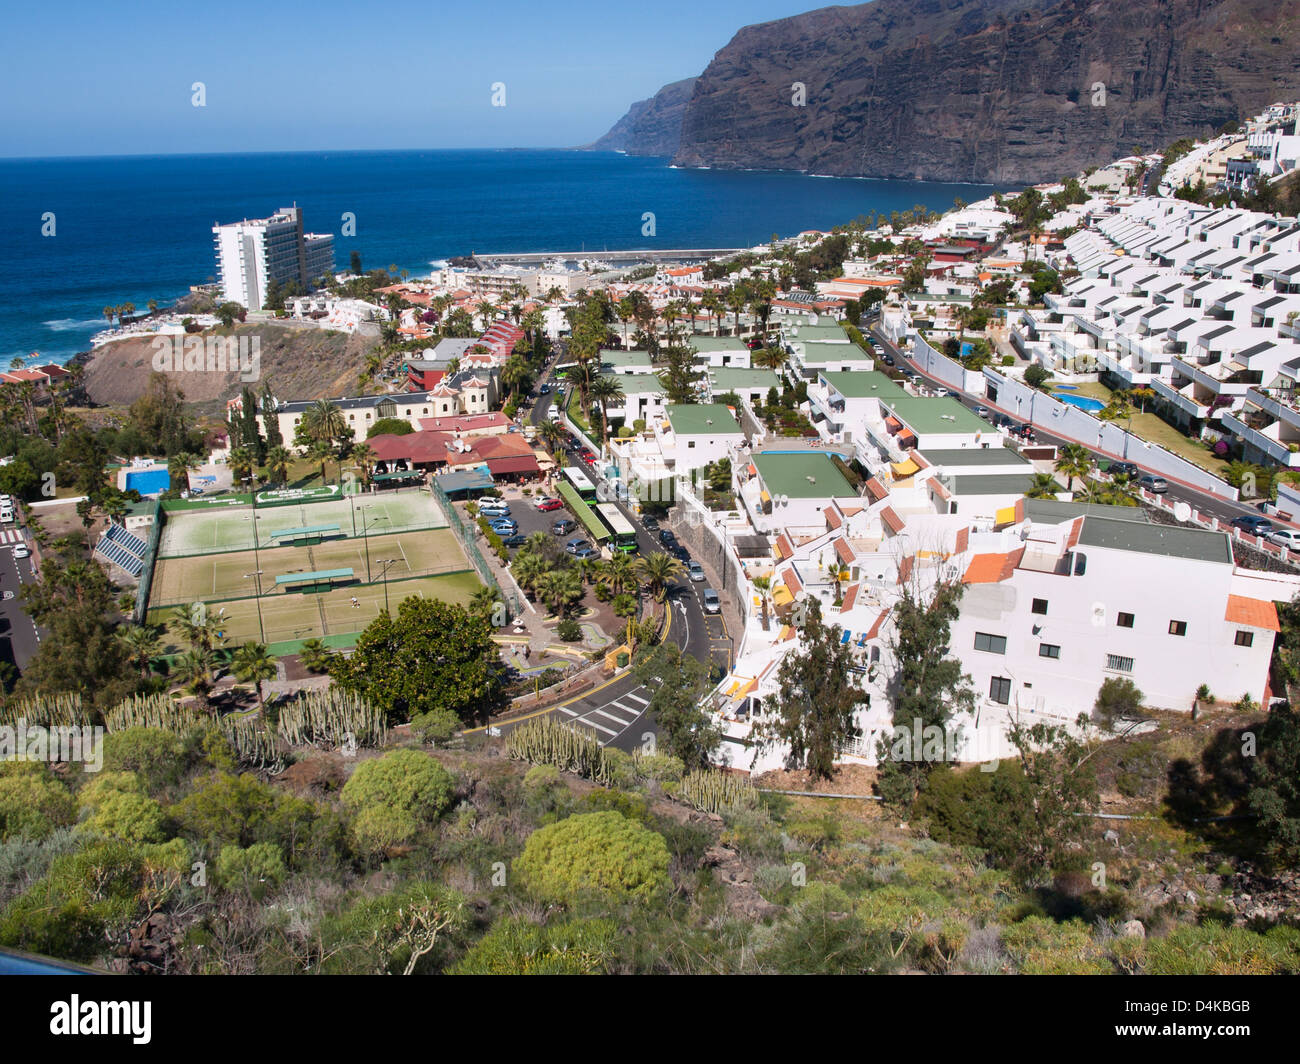 Los Gigantes holiday resort  in Tenerife Spain with the cliffs Acantilados and Atlantic ocean, bus station in the middle Stock Photo